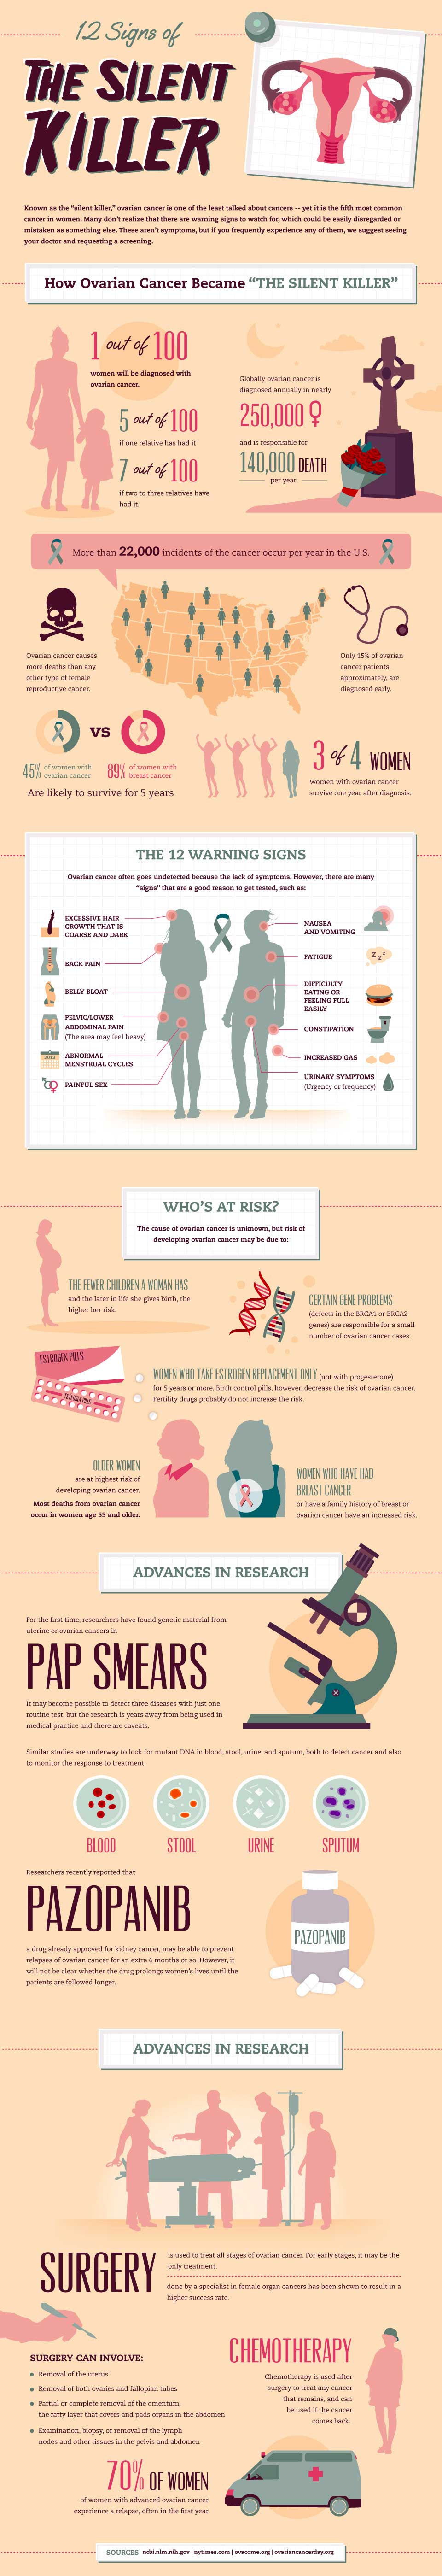 Ovarian Cancer 12 Signs of the Silent Killer-Infographic